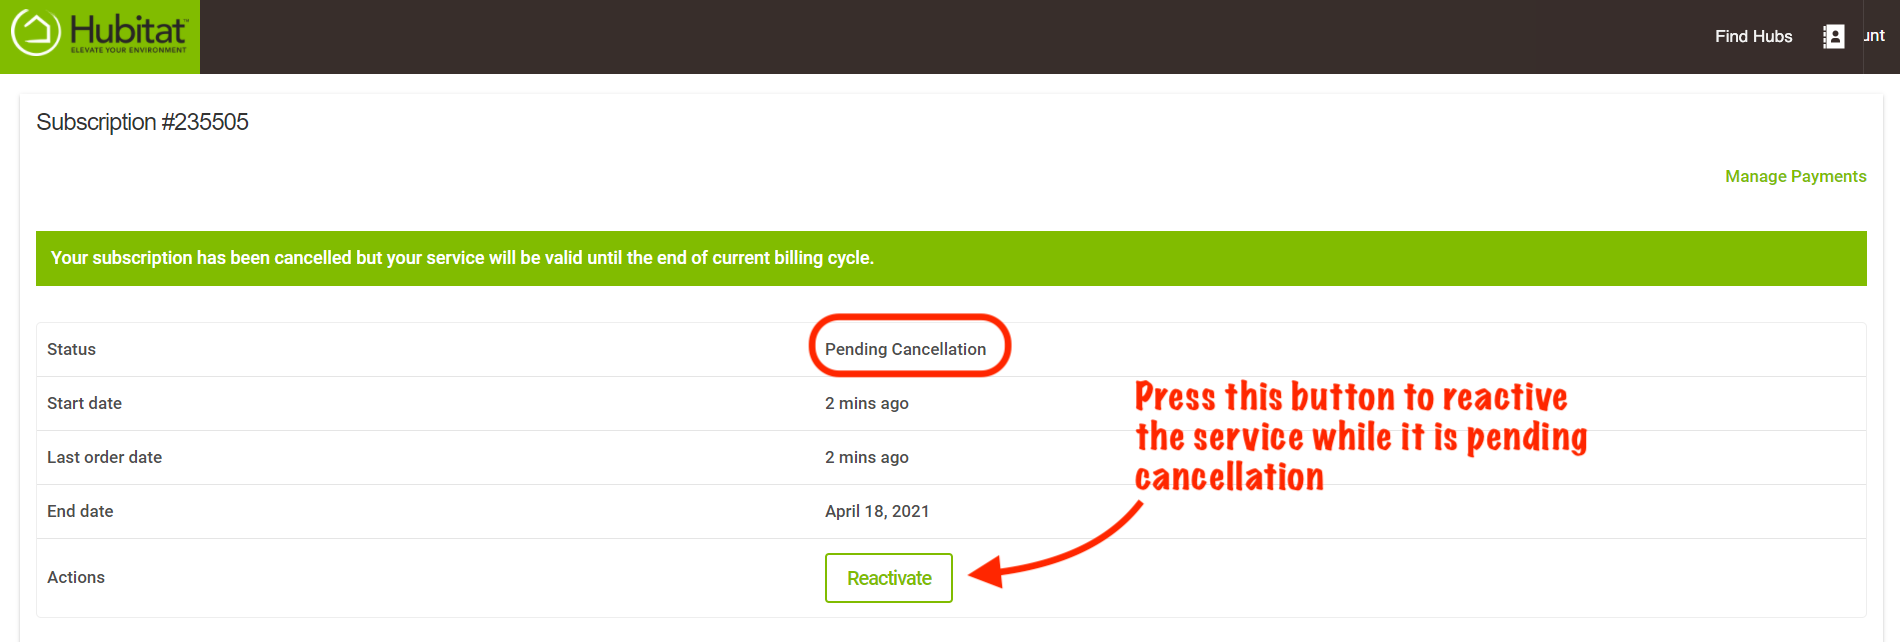 Subscription pending cancellation v2.png